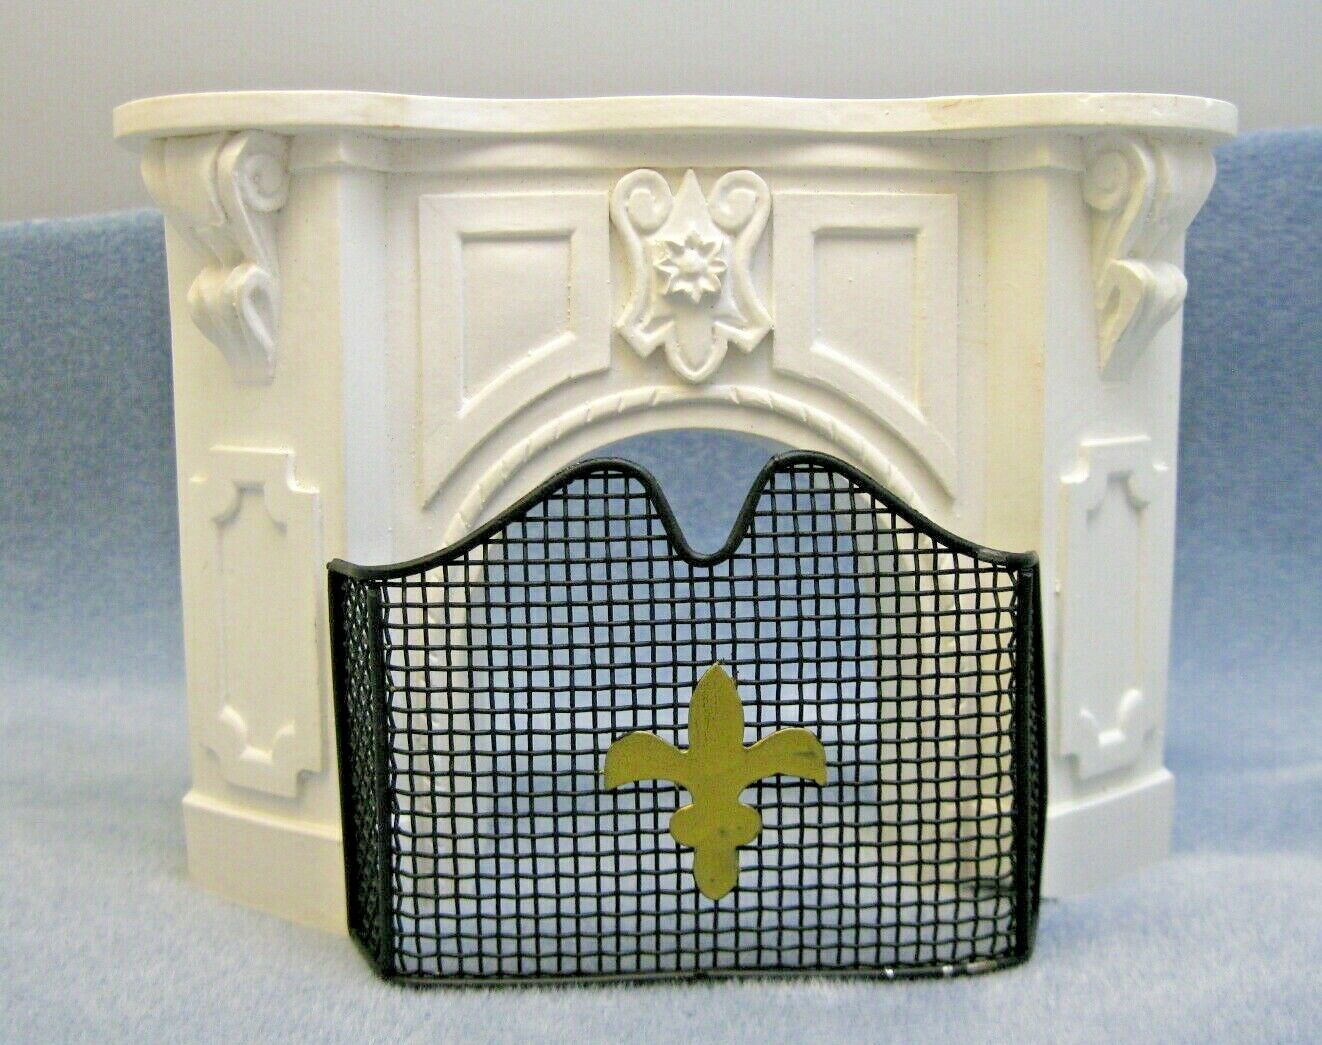 Fireplace With Screen Colonial Plaster Of Paris Dollhouse Miniature 1:12 Read